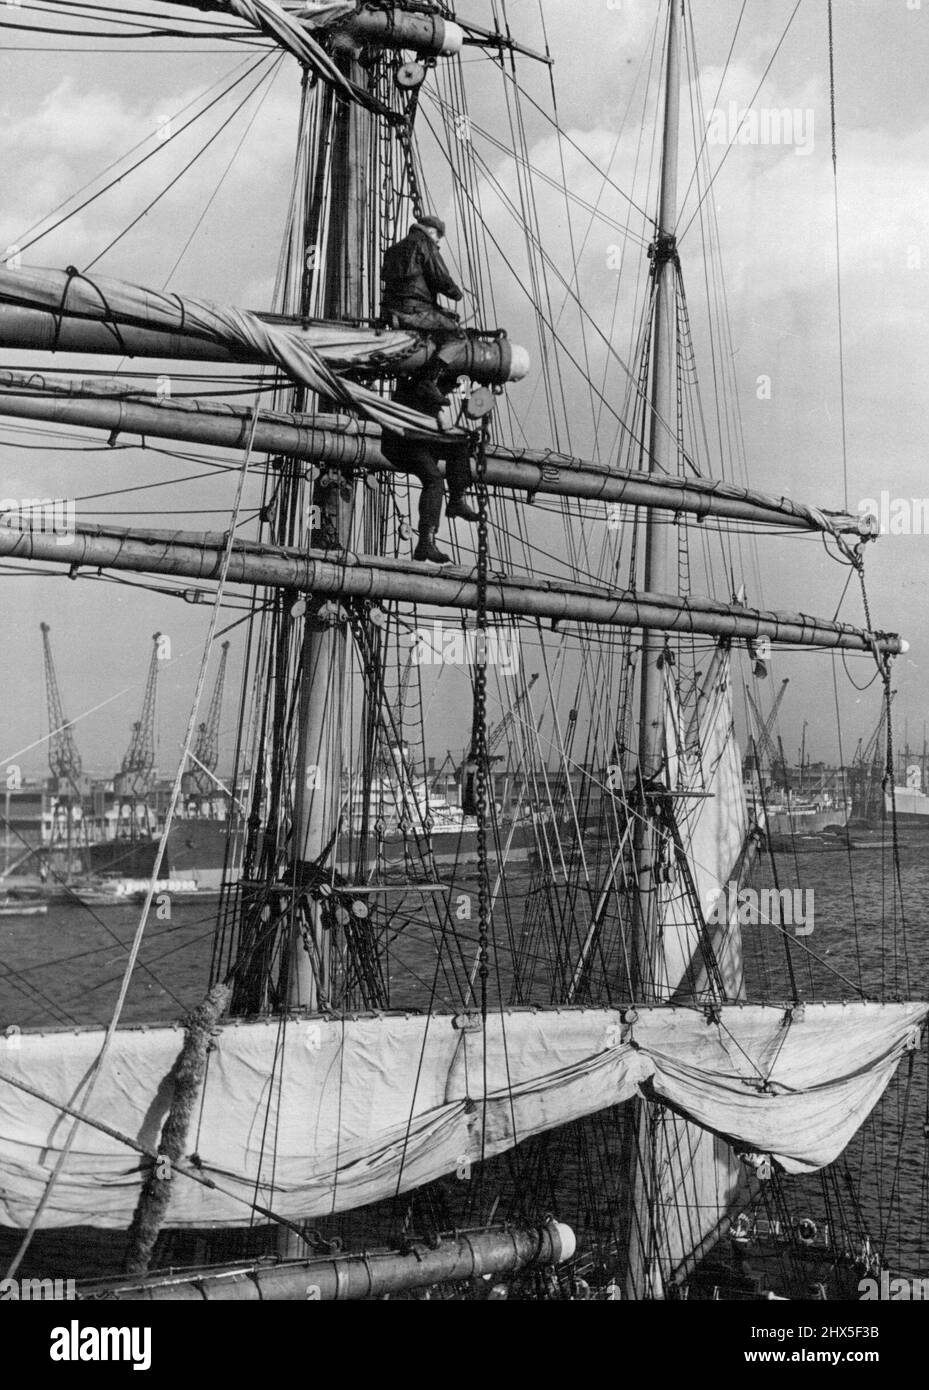 The 'Pamir' Overhauls Sails The crew of the Pamir look down on a long line of steamship their cargo as they clamber aloft. A spectacle not witnessed in London Docks for many, many years can now be seen in the Royal Victoria Docks, where the 4-master windjammer Pamir is berthed after her 80 days voyage from New Zealand. After a brief spell of rest over Xmas, the crew is new busy at the arduous task of over-hauling the majestic vessel's thousands of square feet of canvas. With the crew clambering over the rigging high above the noise activity that is London Docks, the Pamir presents a picturesqu Stock Photo